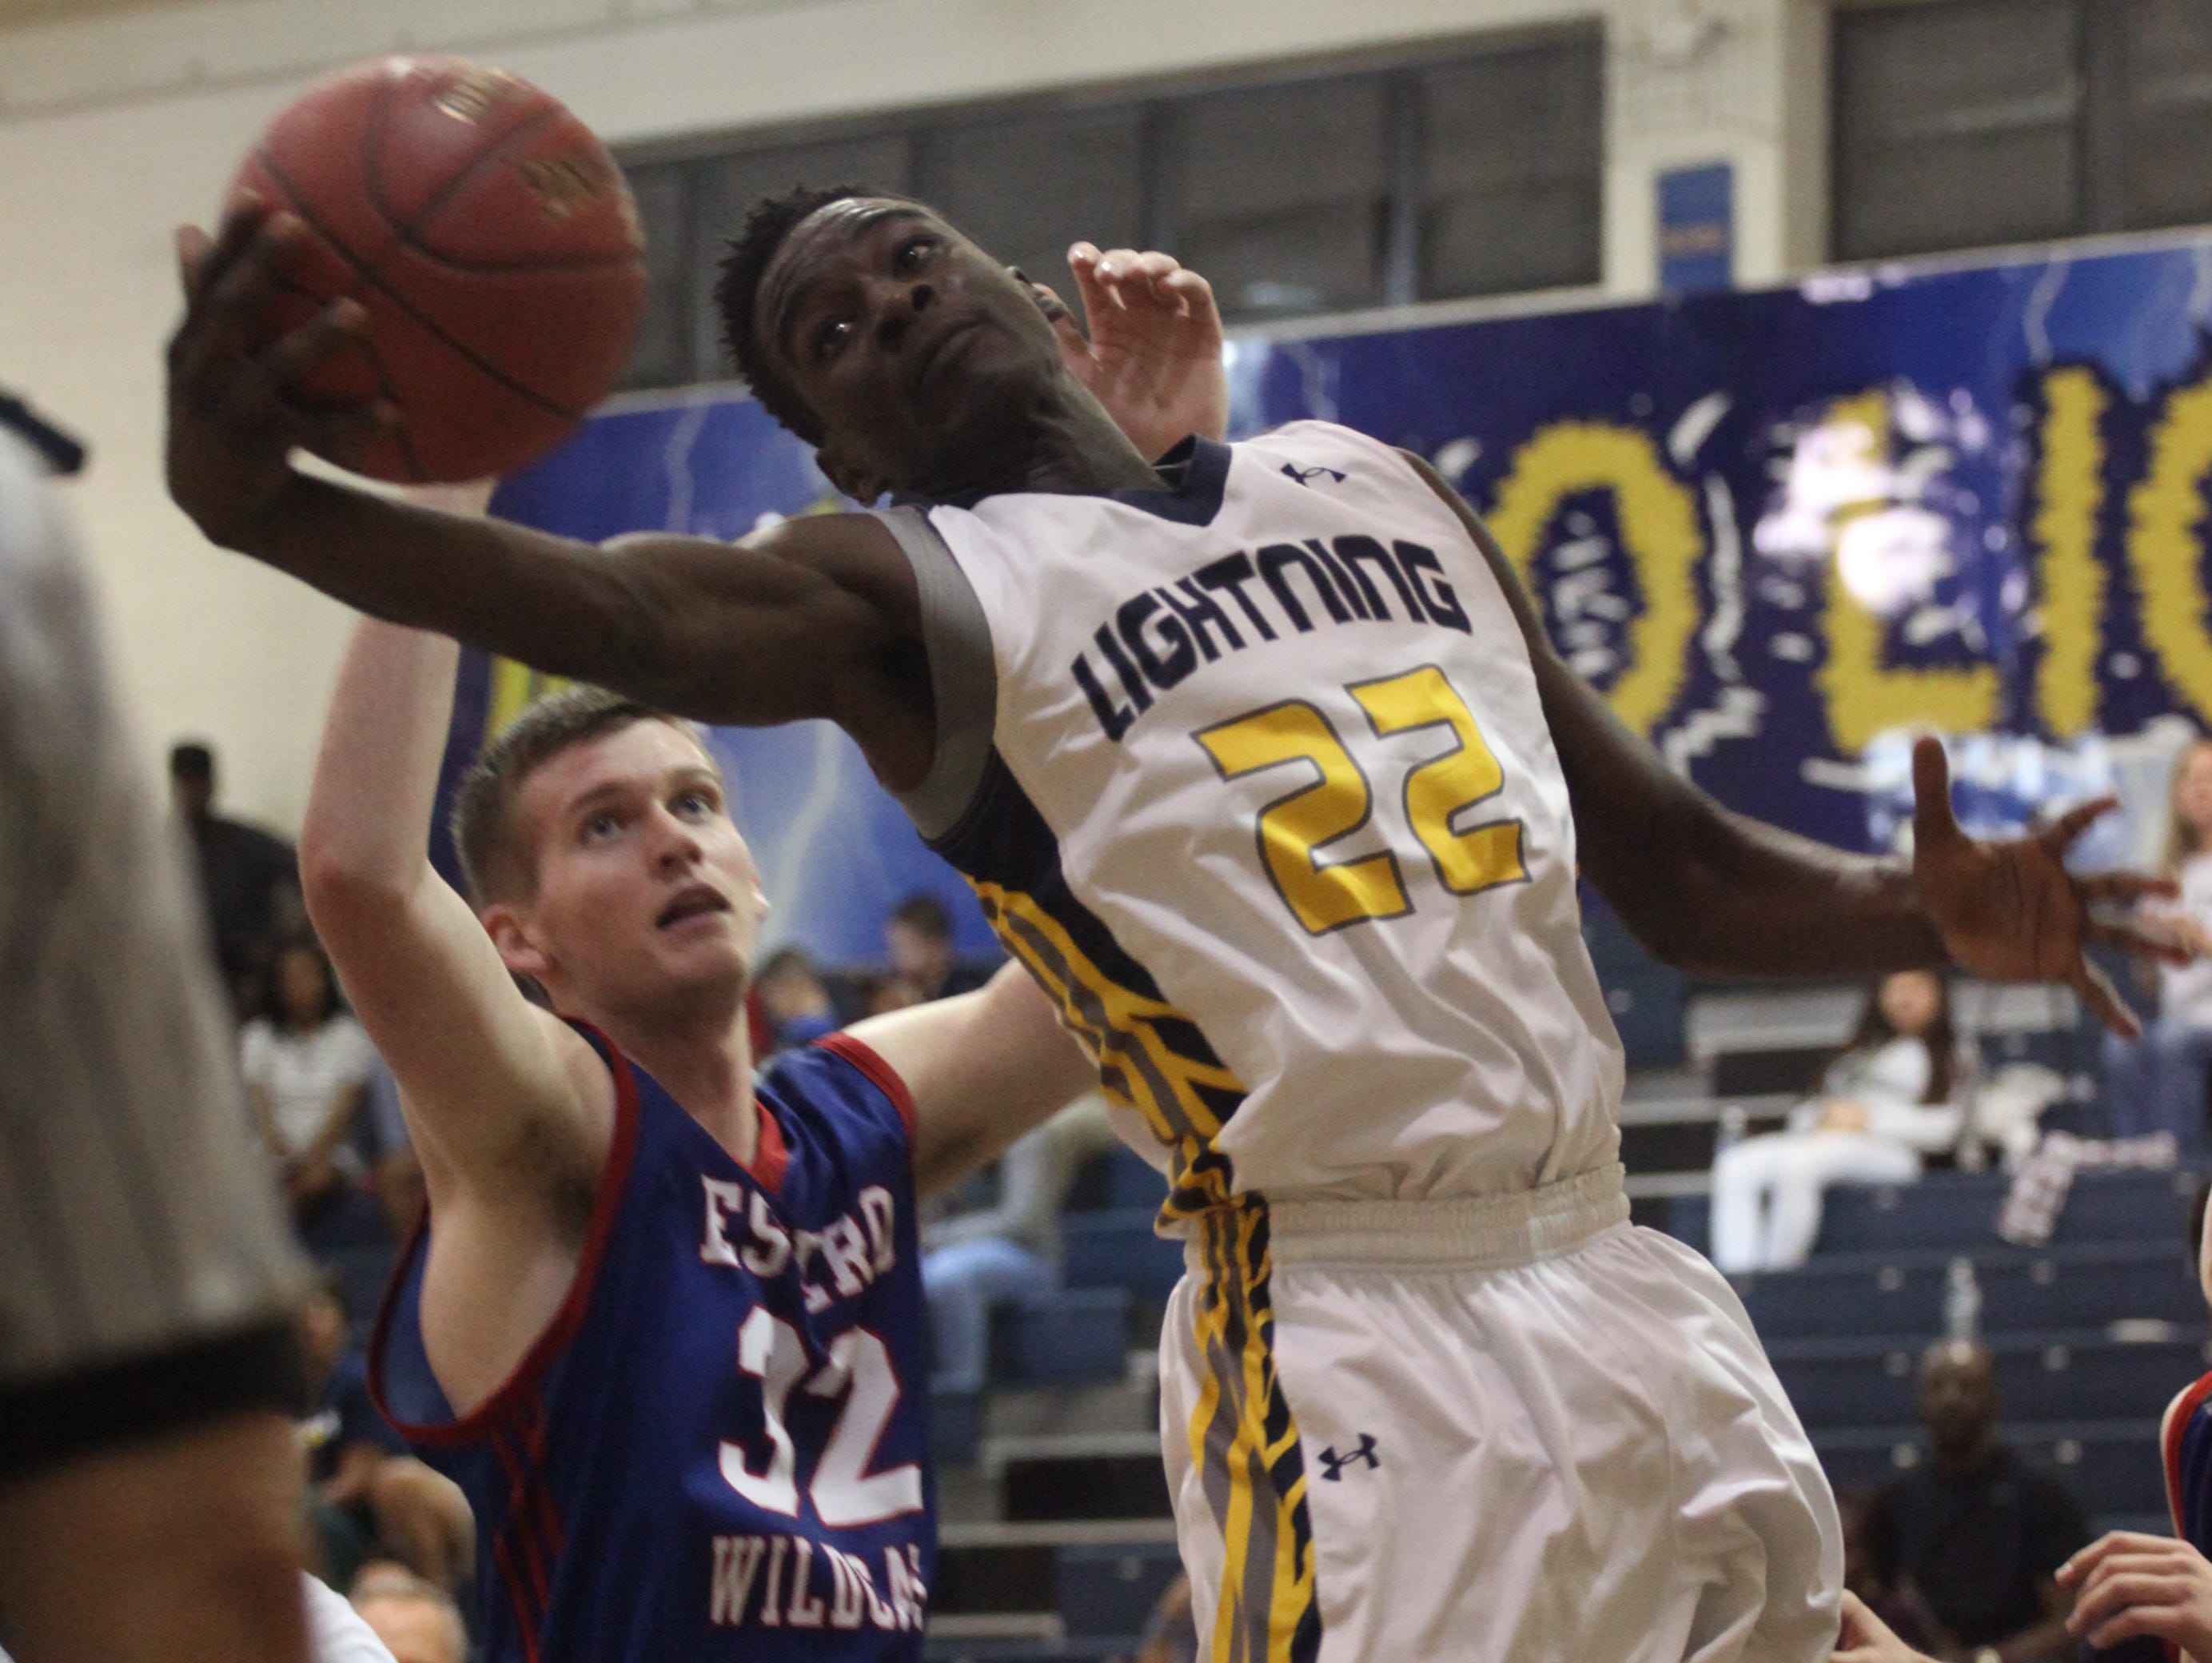 Lehigh’s Shyheem Jacques-Louis snatches the rebound during a game against Estero on Wednesday.